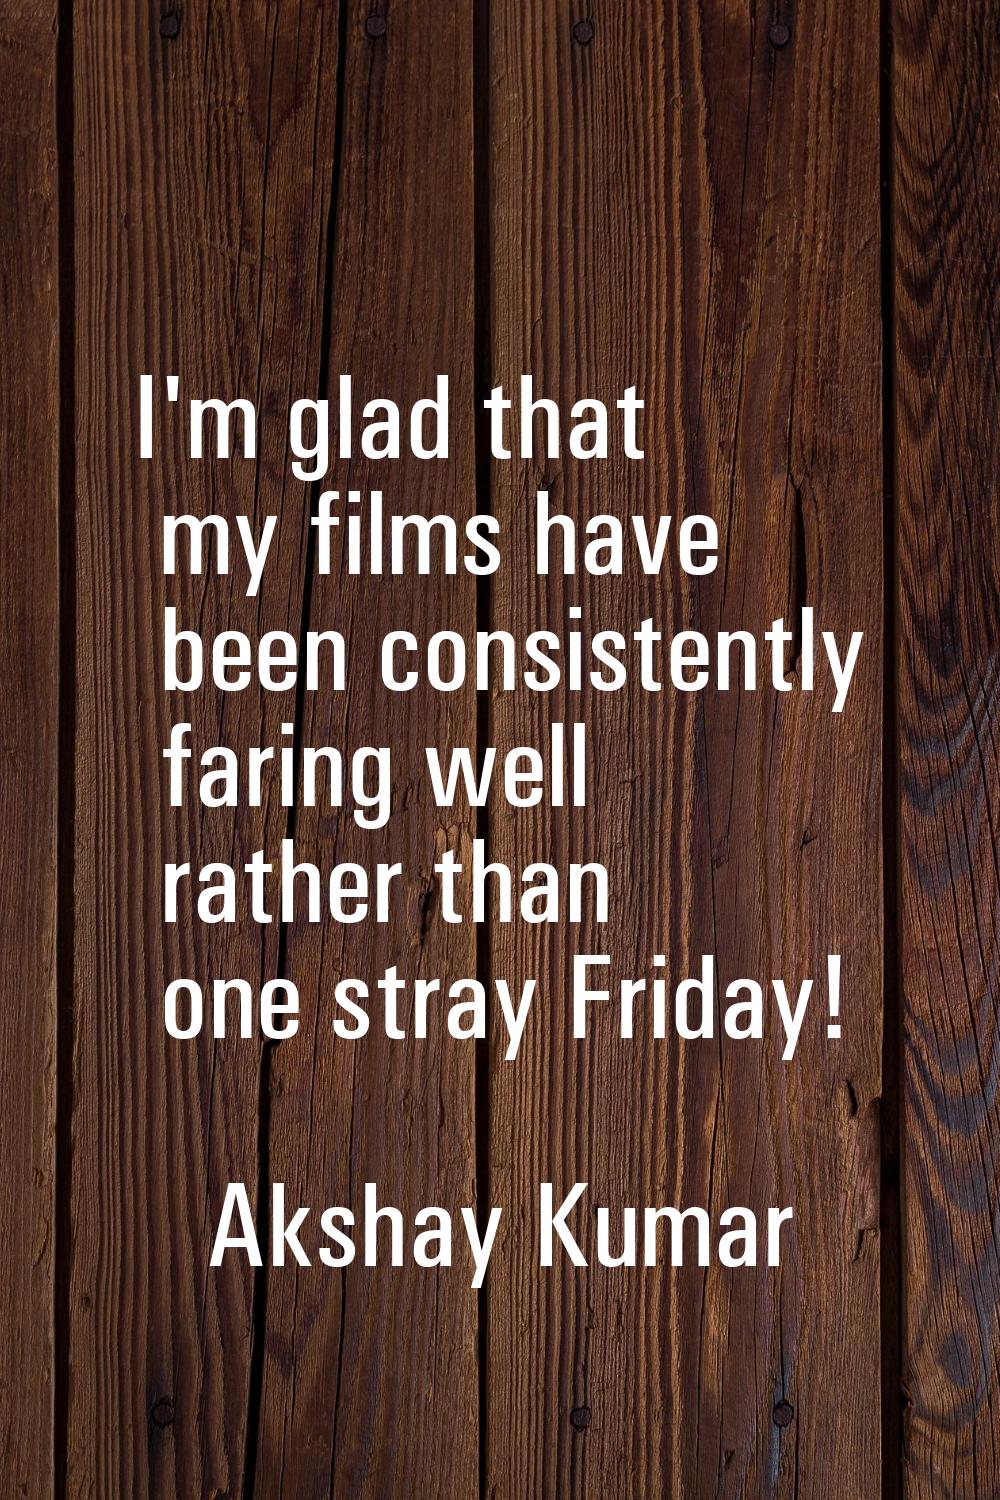 I'm glad that my films have been consistently faring well rather than one stray Friday!